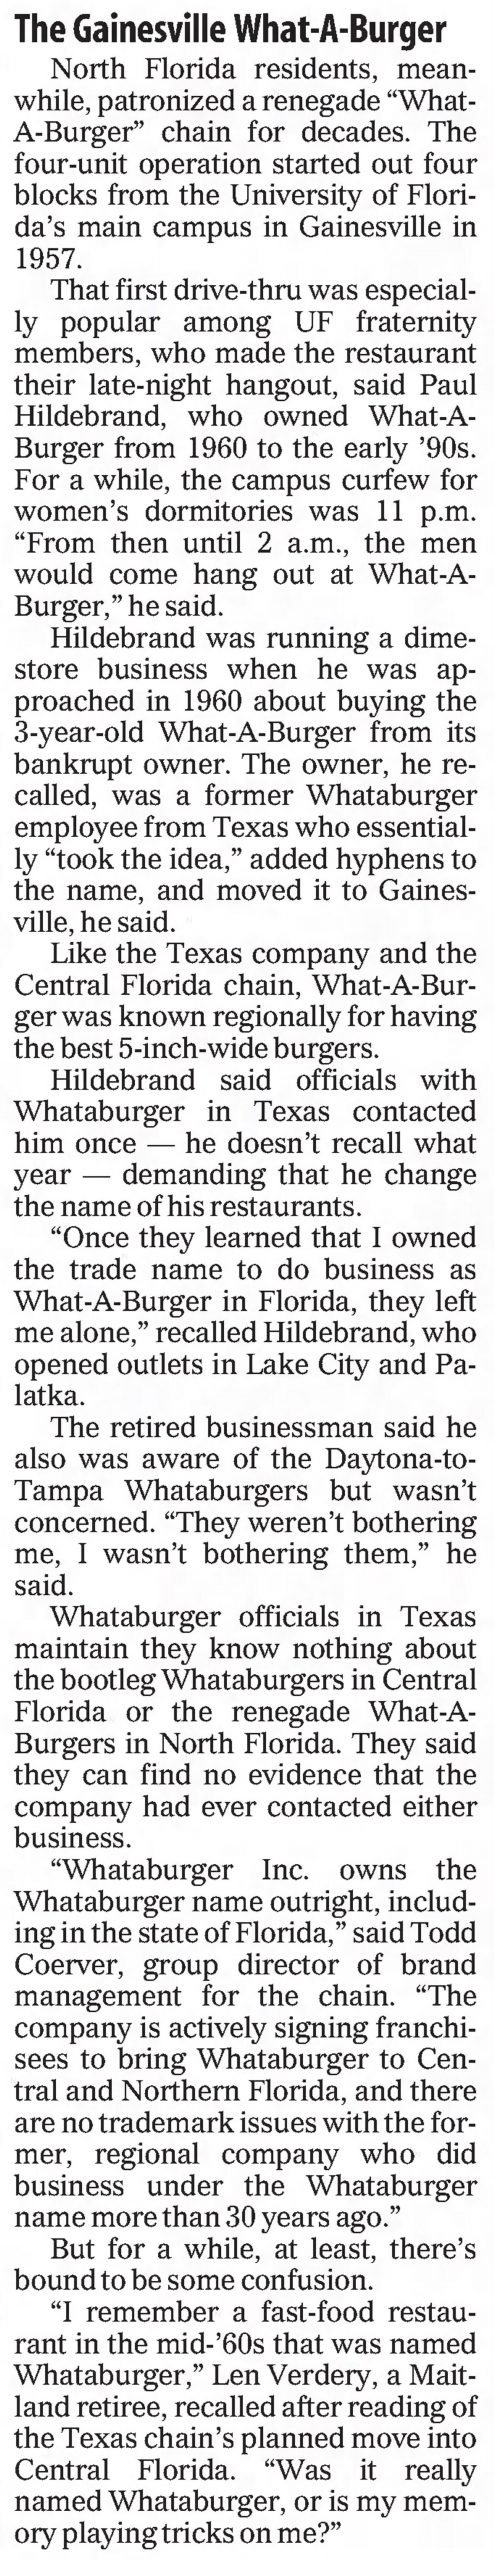 Gainesville What-A-Burger in The Orlando Sentinel June 28th, 2003